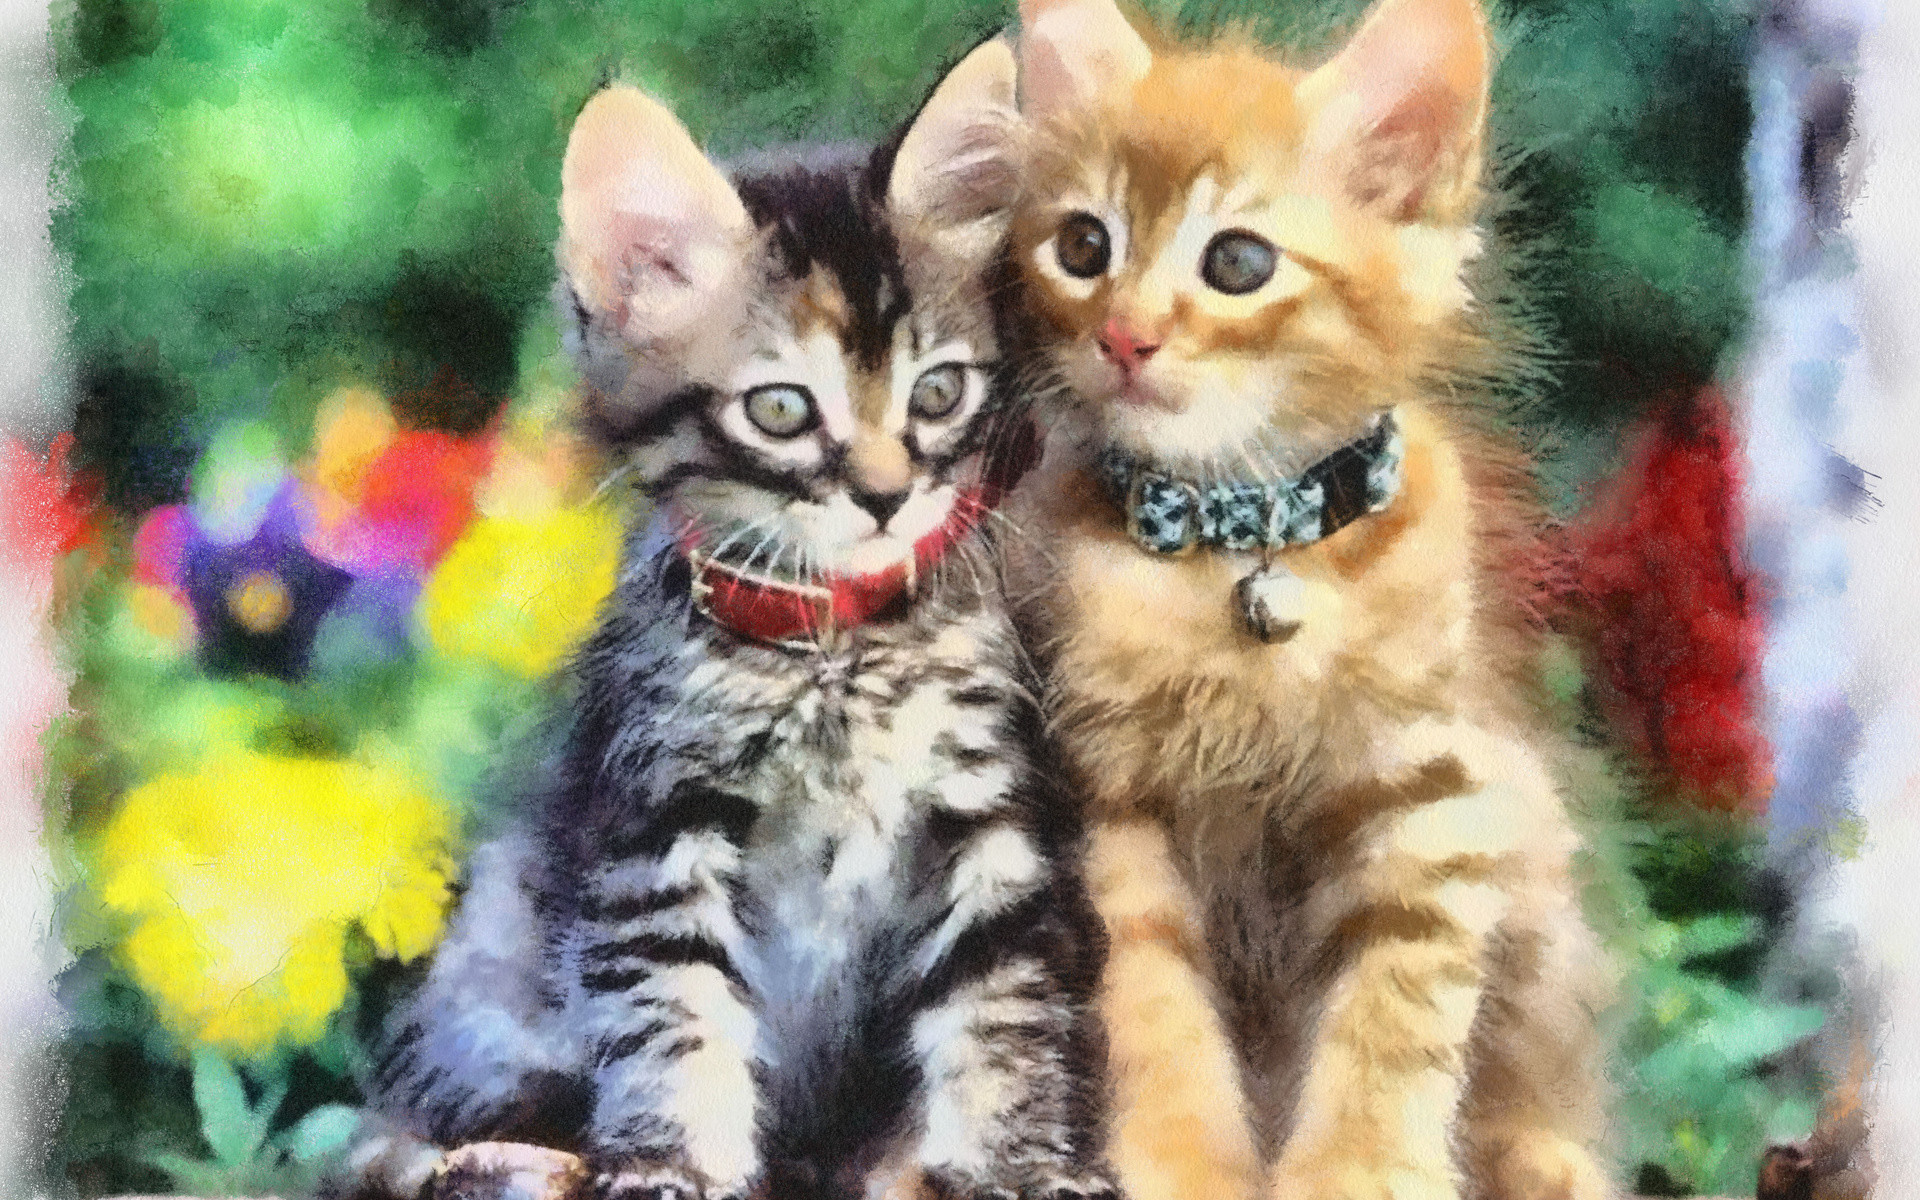 1920x1200 animals, Cats, Kittens, Whiskers, Fur, Face, Eyes, Nose, Collar, Jewelry,  Art, Artistic, Colors, Flowers, Love, Friends, Children Wallpapers HD /  Desktop ...